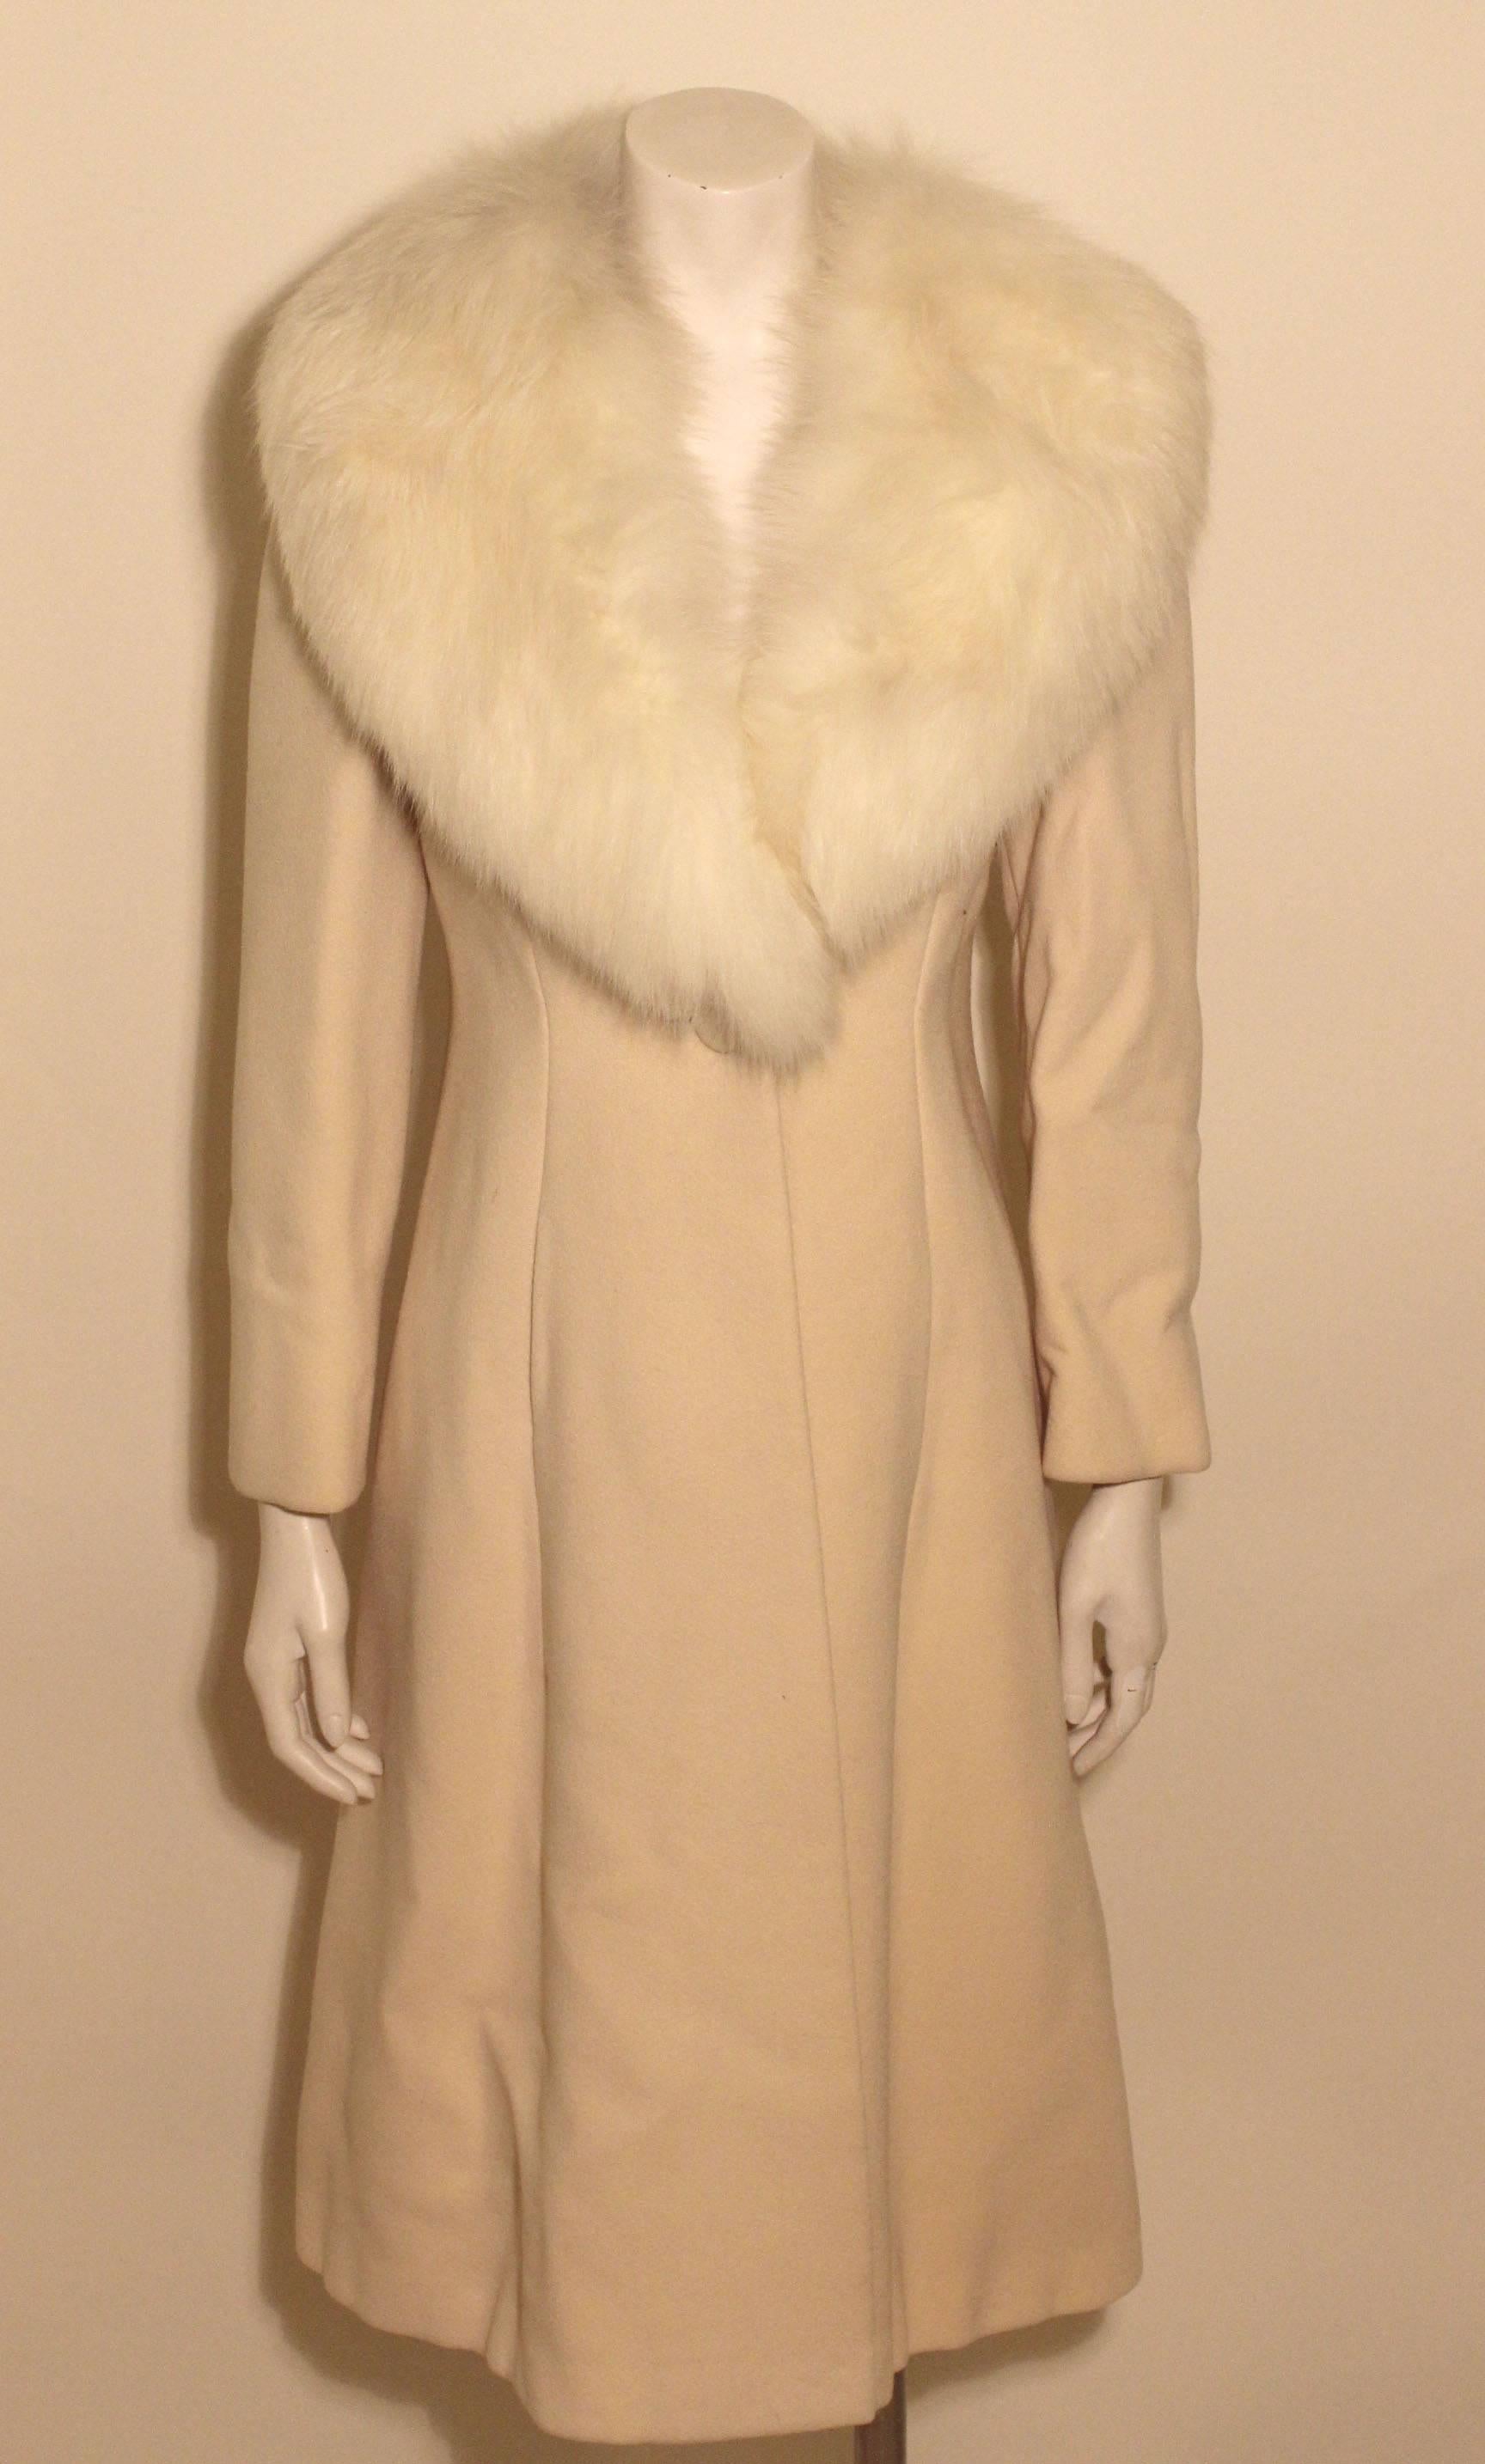 This luxurous Pauline Trigere coat is the epitome of style. The creme colored long coat has a classic single covered button, and a full white fox collar. 